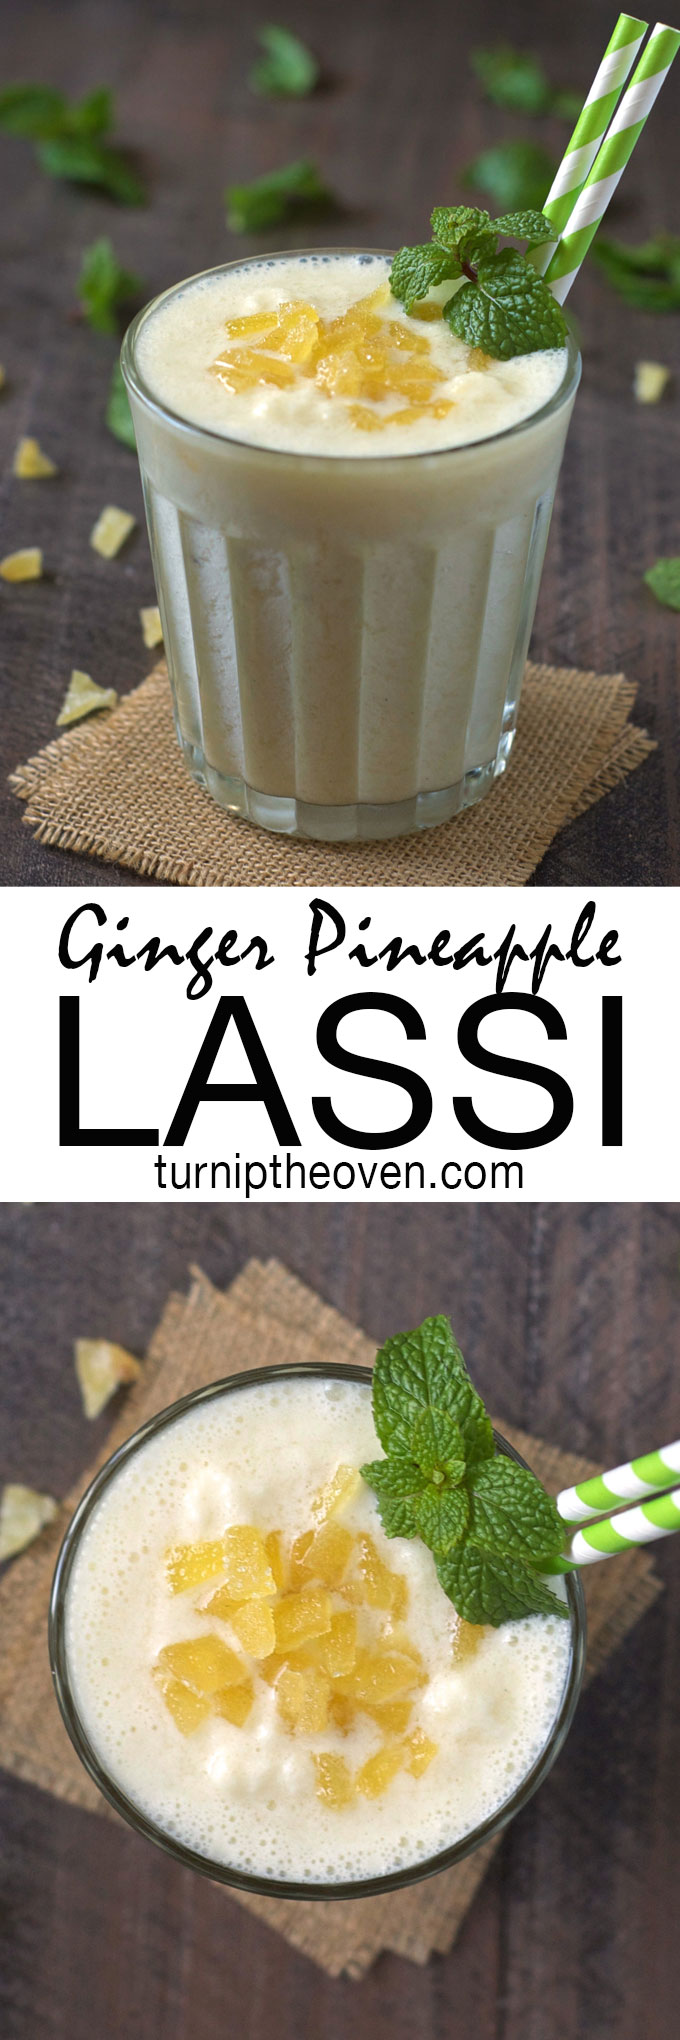 This ginger pineapple lassi is a great way to spice up your morning smoothie routine! Made with only six simple, real food ingredients, it's packed with calcium and vitamin C. 